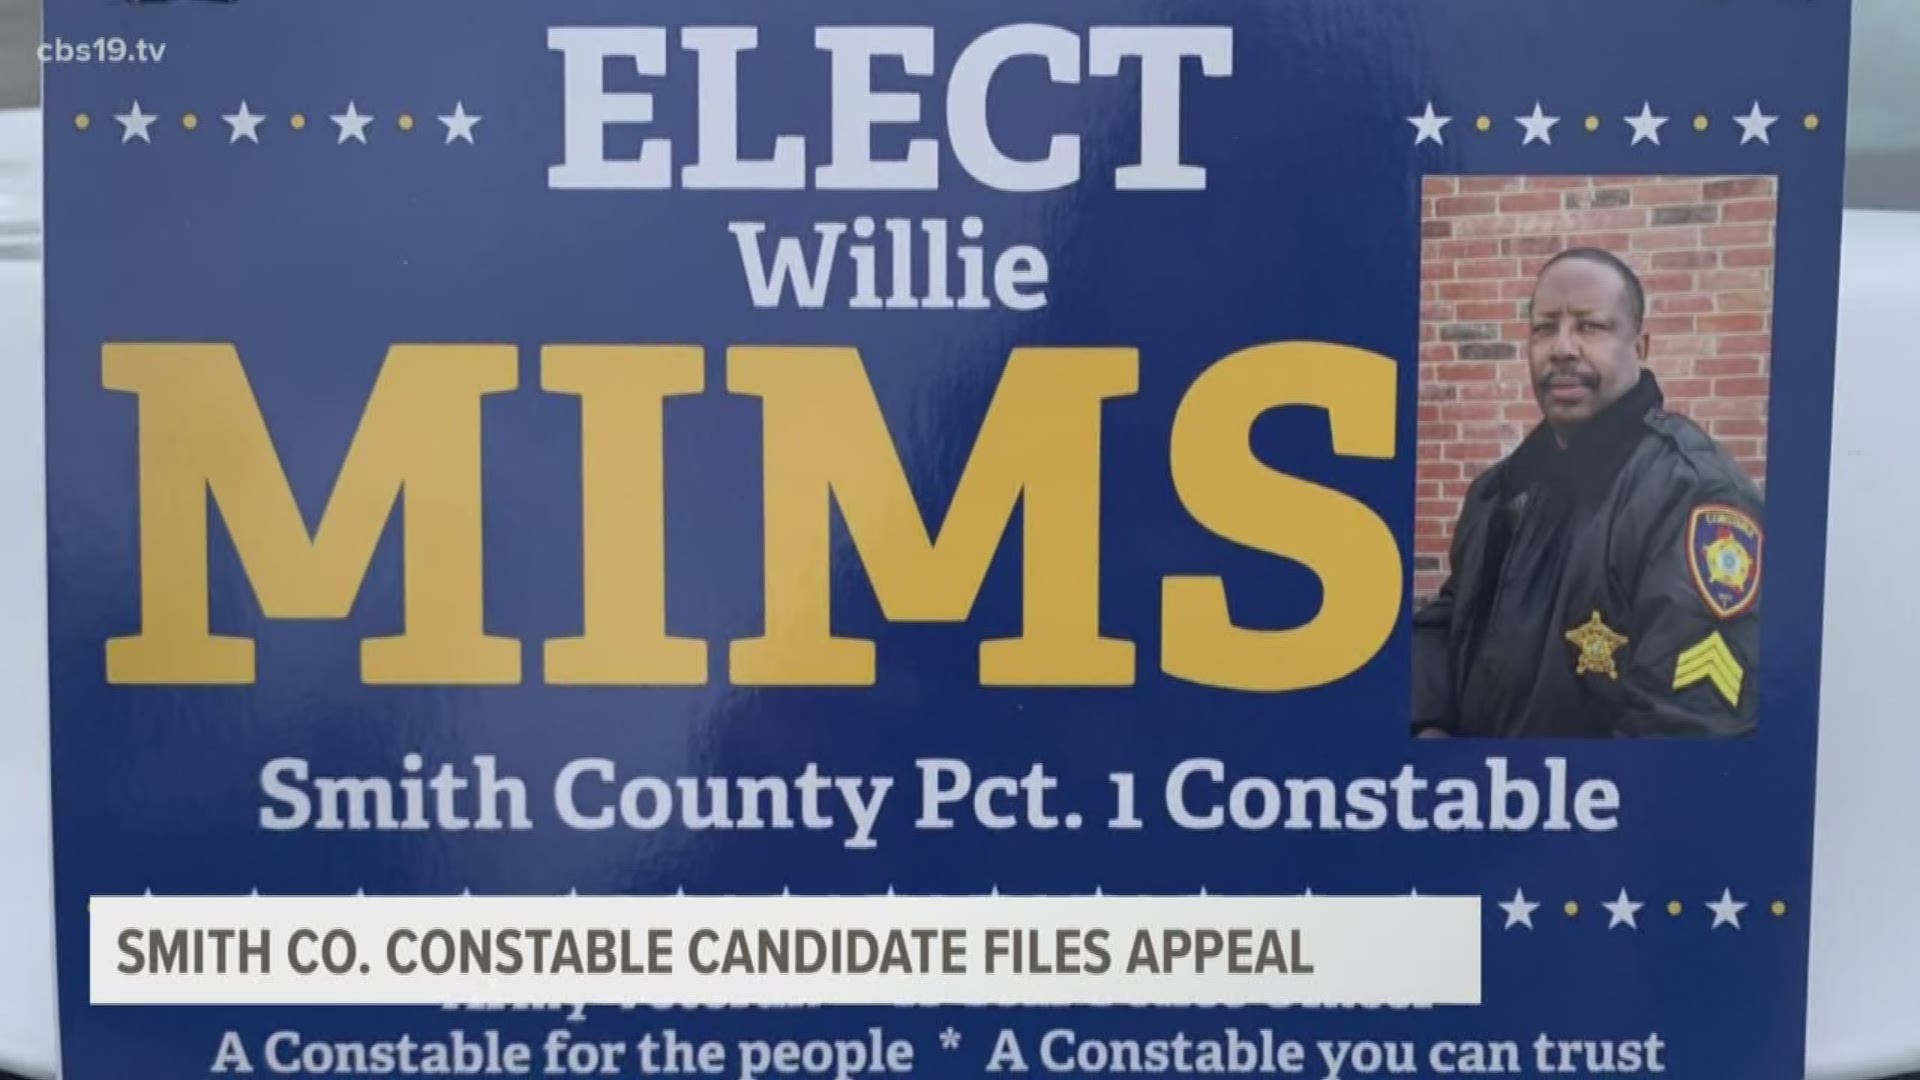 Willie Mims Jr. says he’s trying to clear confusion around his campaign for Smith County Precinct 1 Constable.